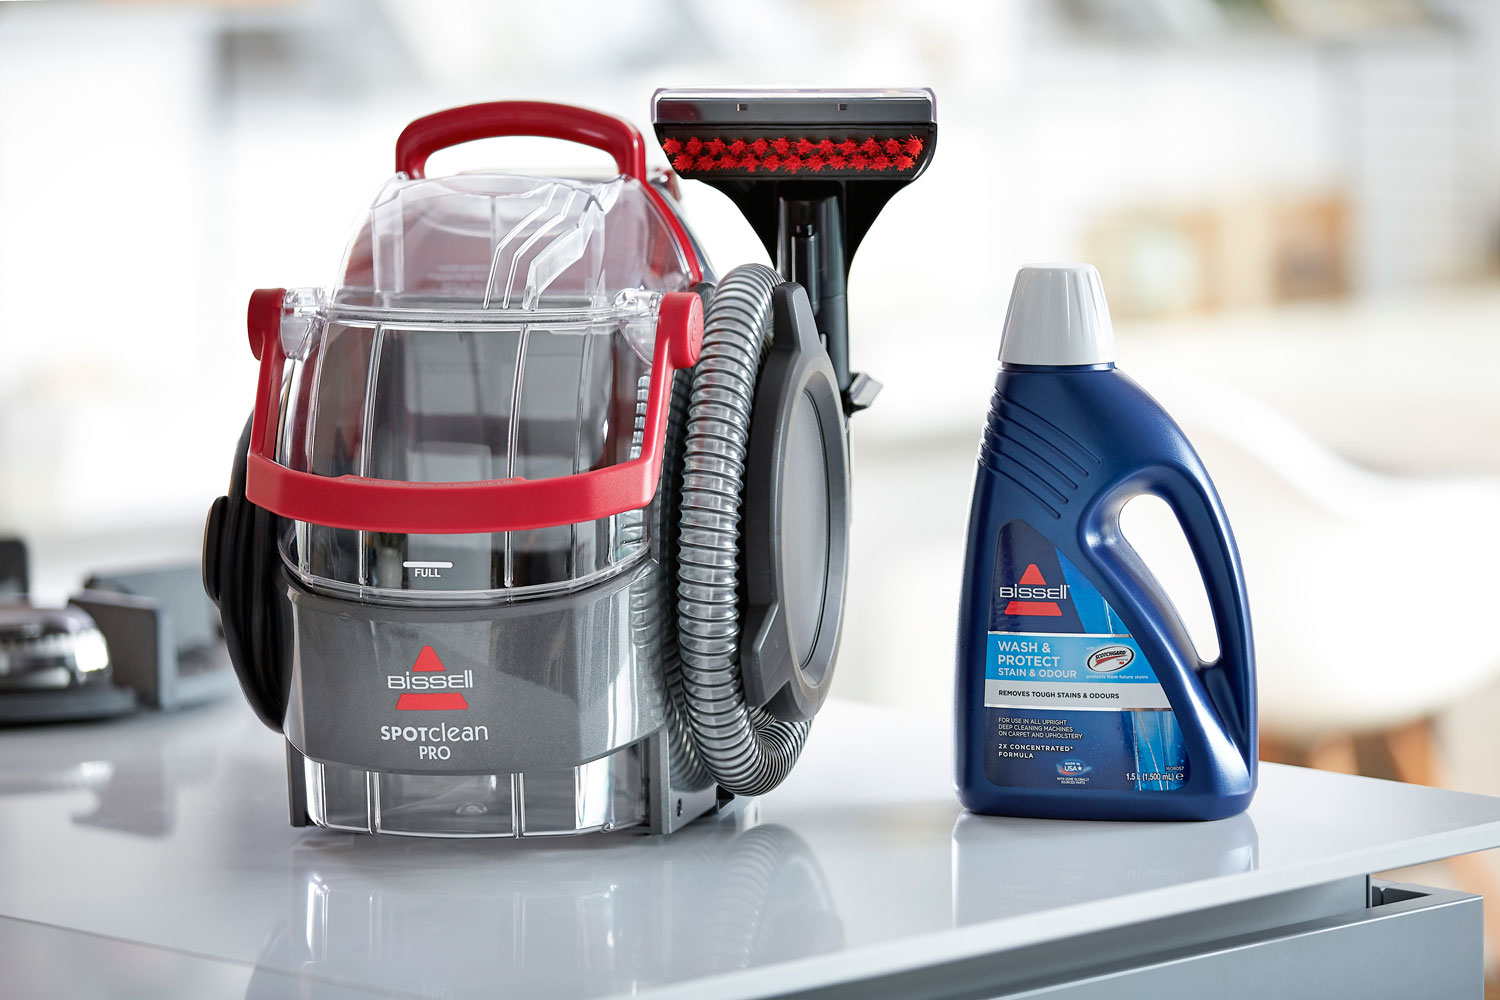 https://www.luxuriousmagazine.com/wp-content/uploads/2020/10/The-BISSELL-SpotClean-Pro-machine-with-a-bottle-of-detergent.jpg